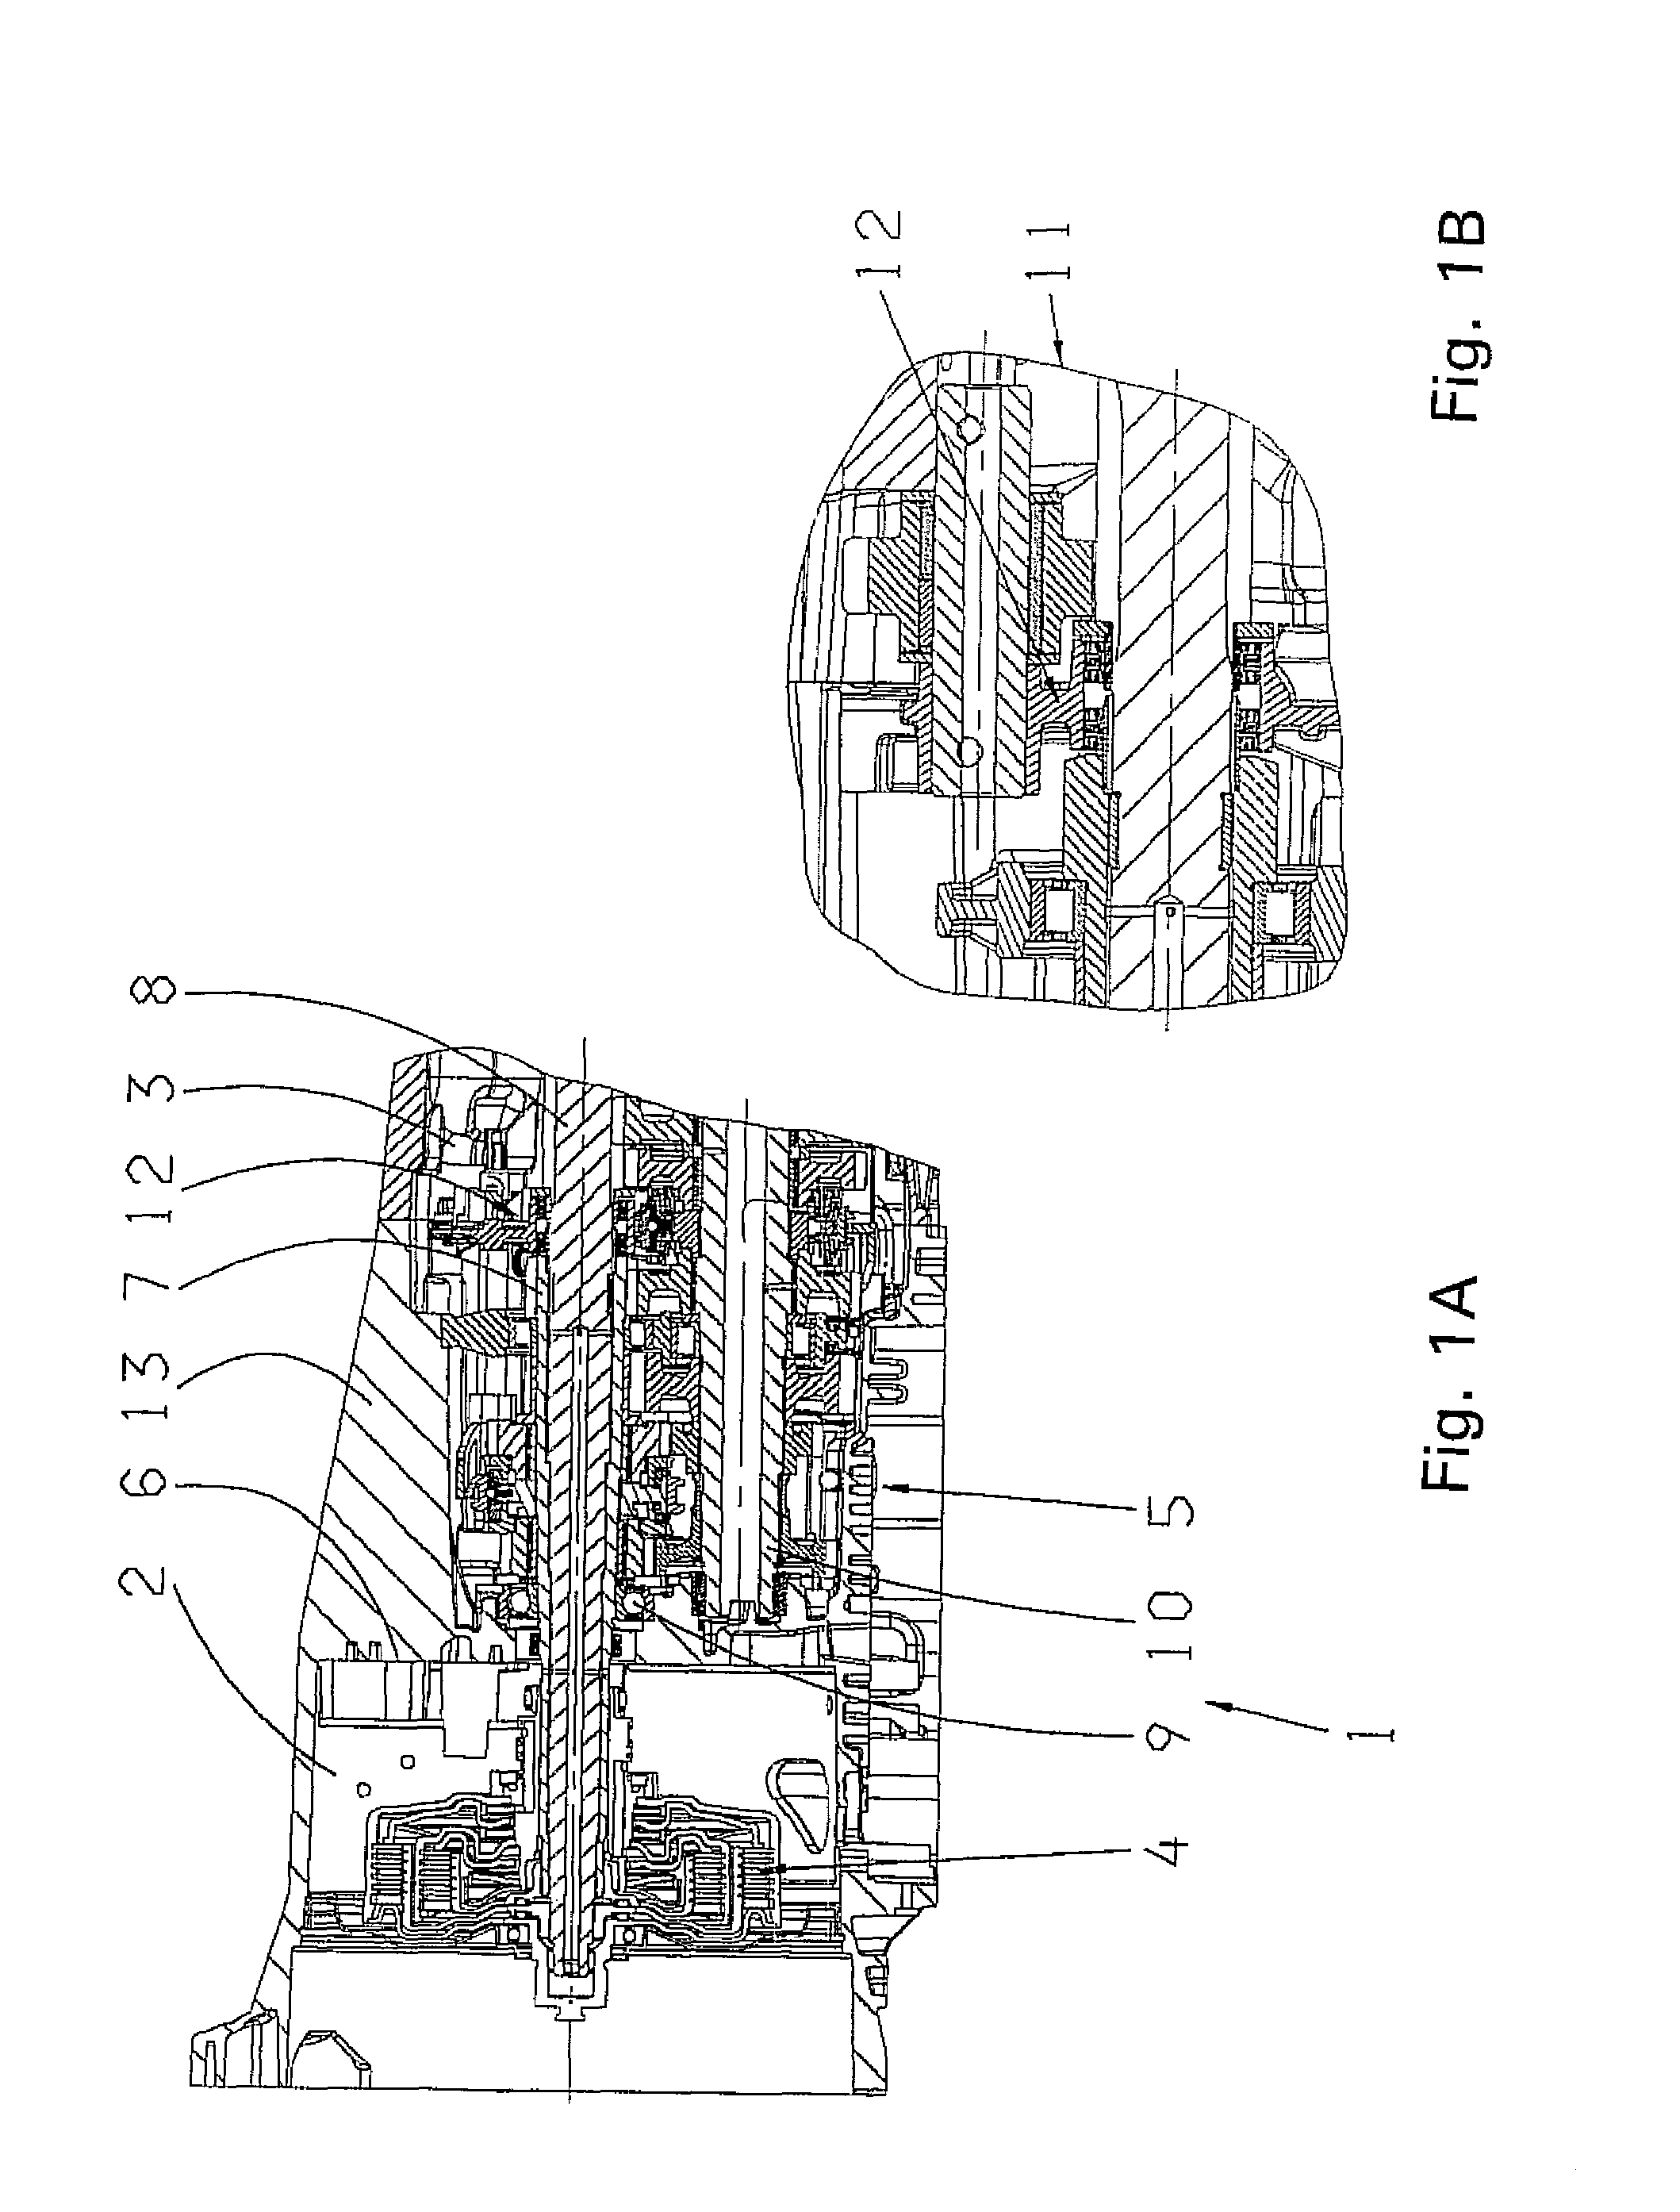 Sealing device for a dual clutch transmission of a motor vehicle